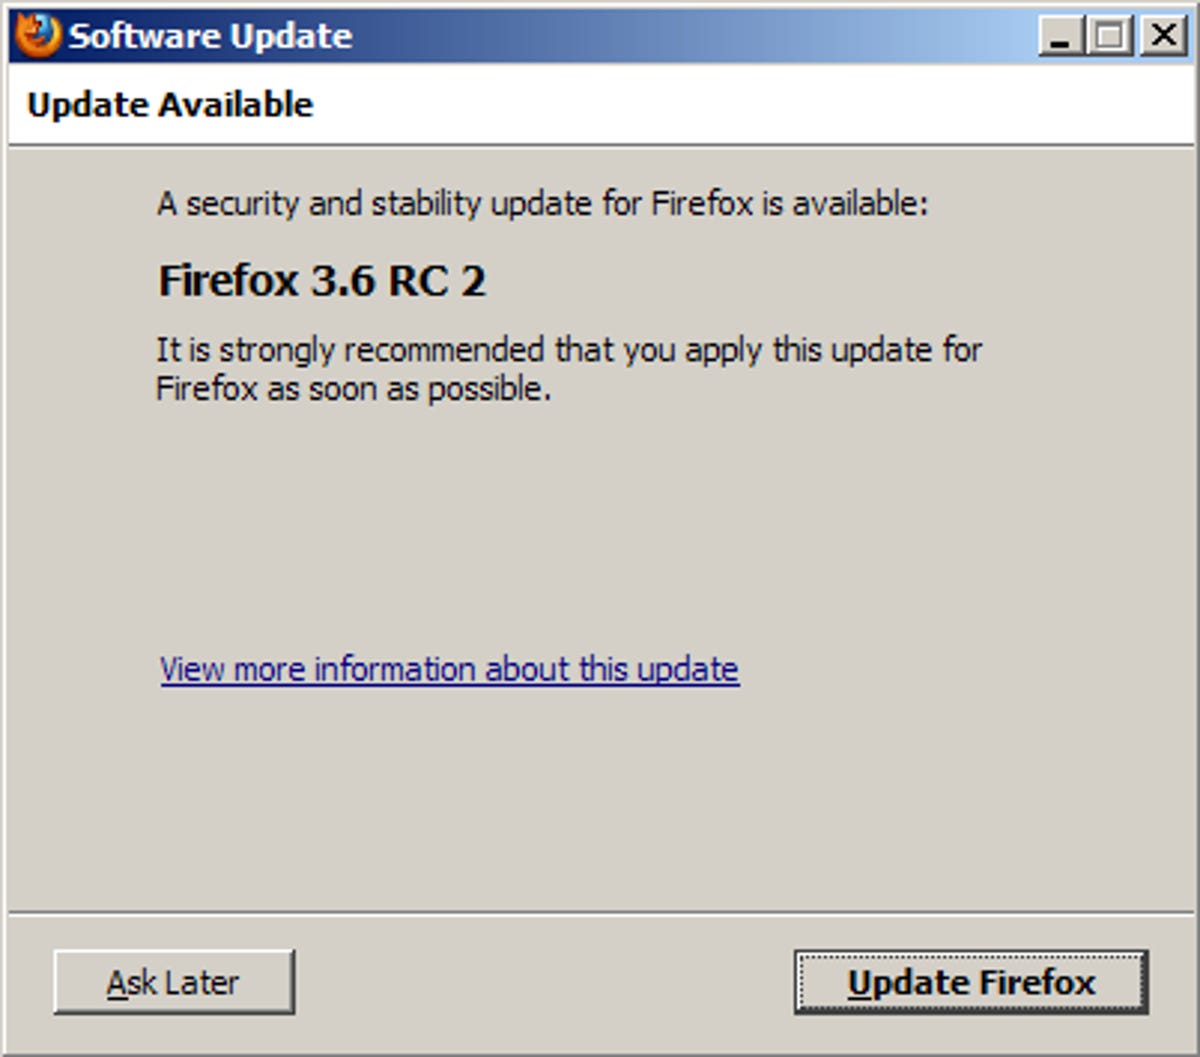 The update process says Firefox 3.6 release candidate 2 improves security and stability.